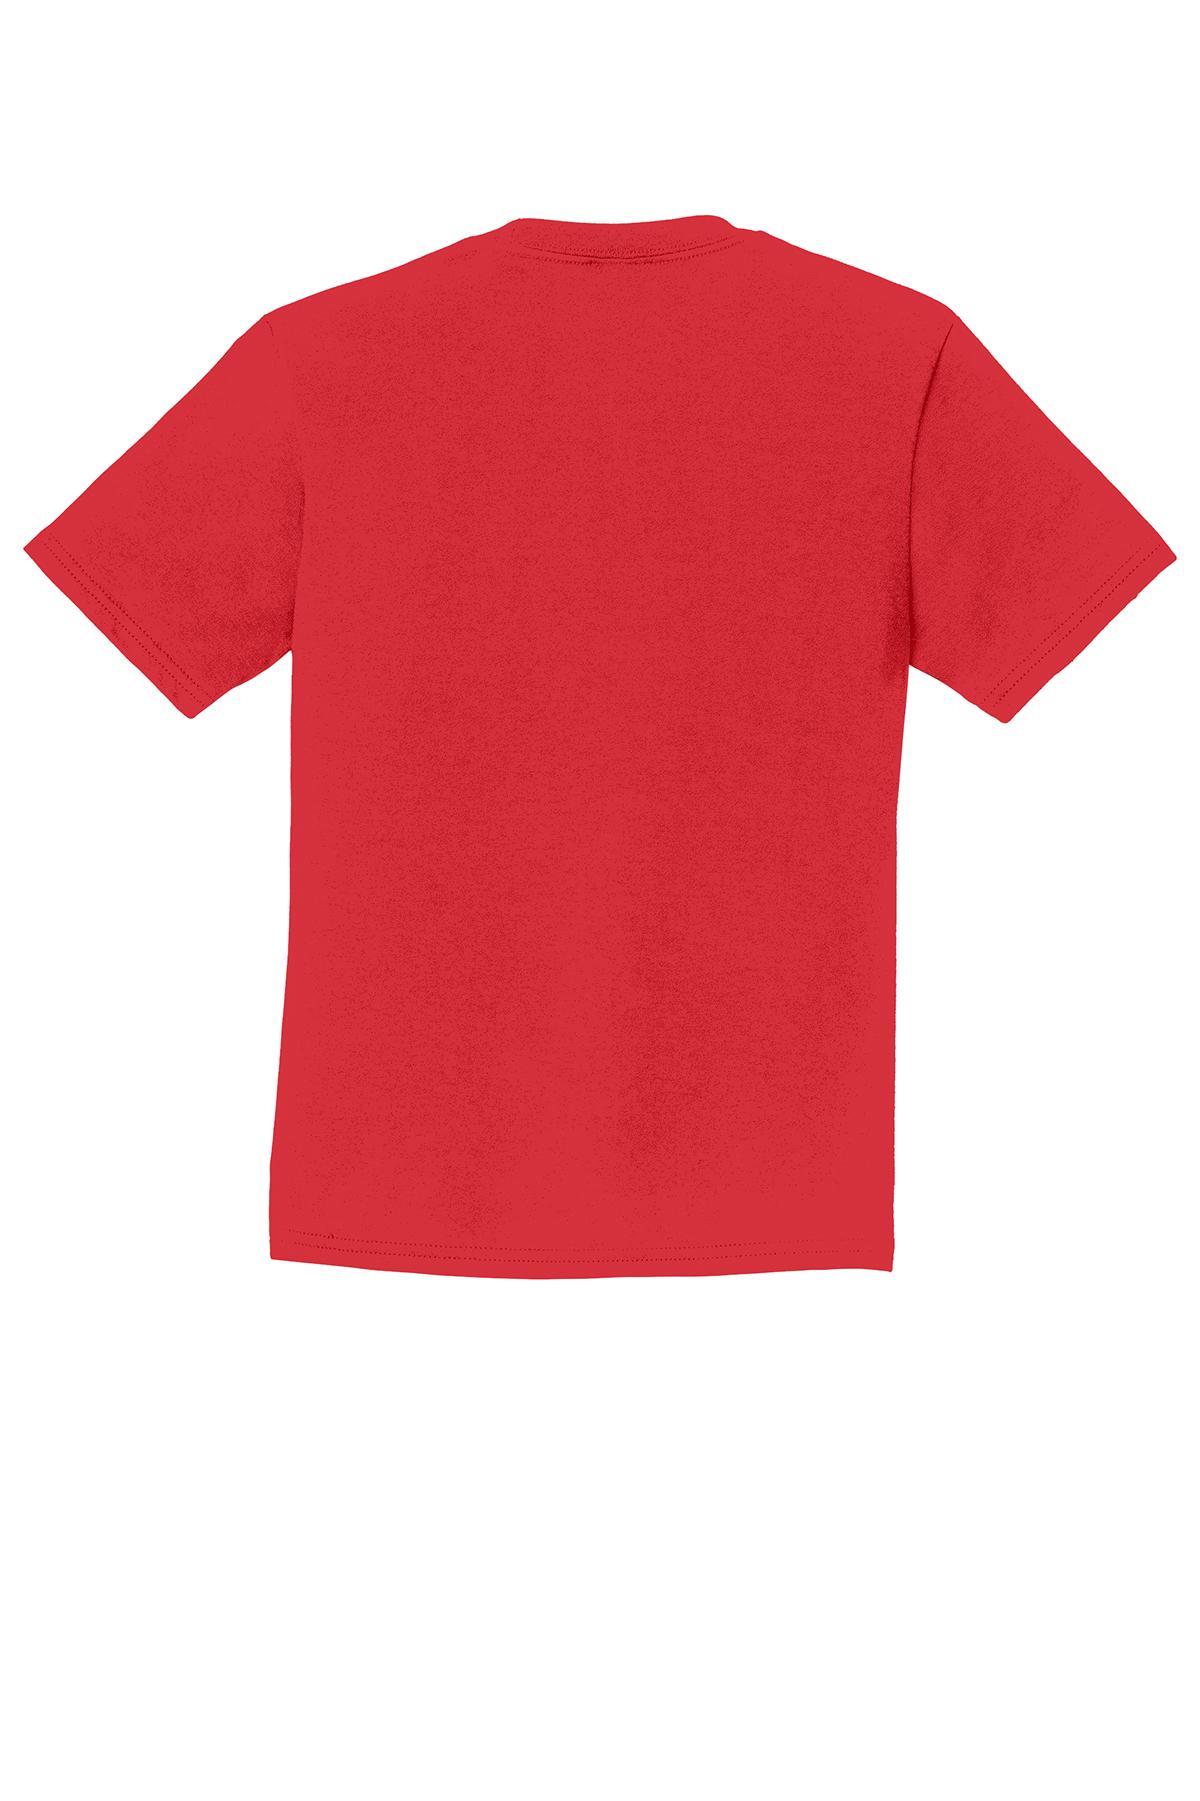 Port & Company ® Youth Fan Favorite™Tee | Product | Company Casuals